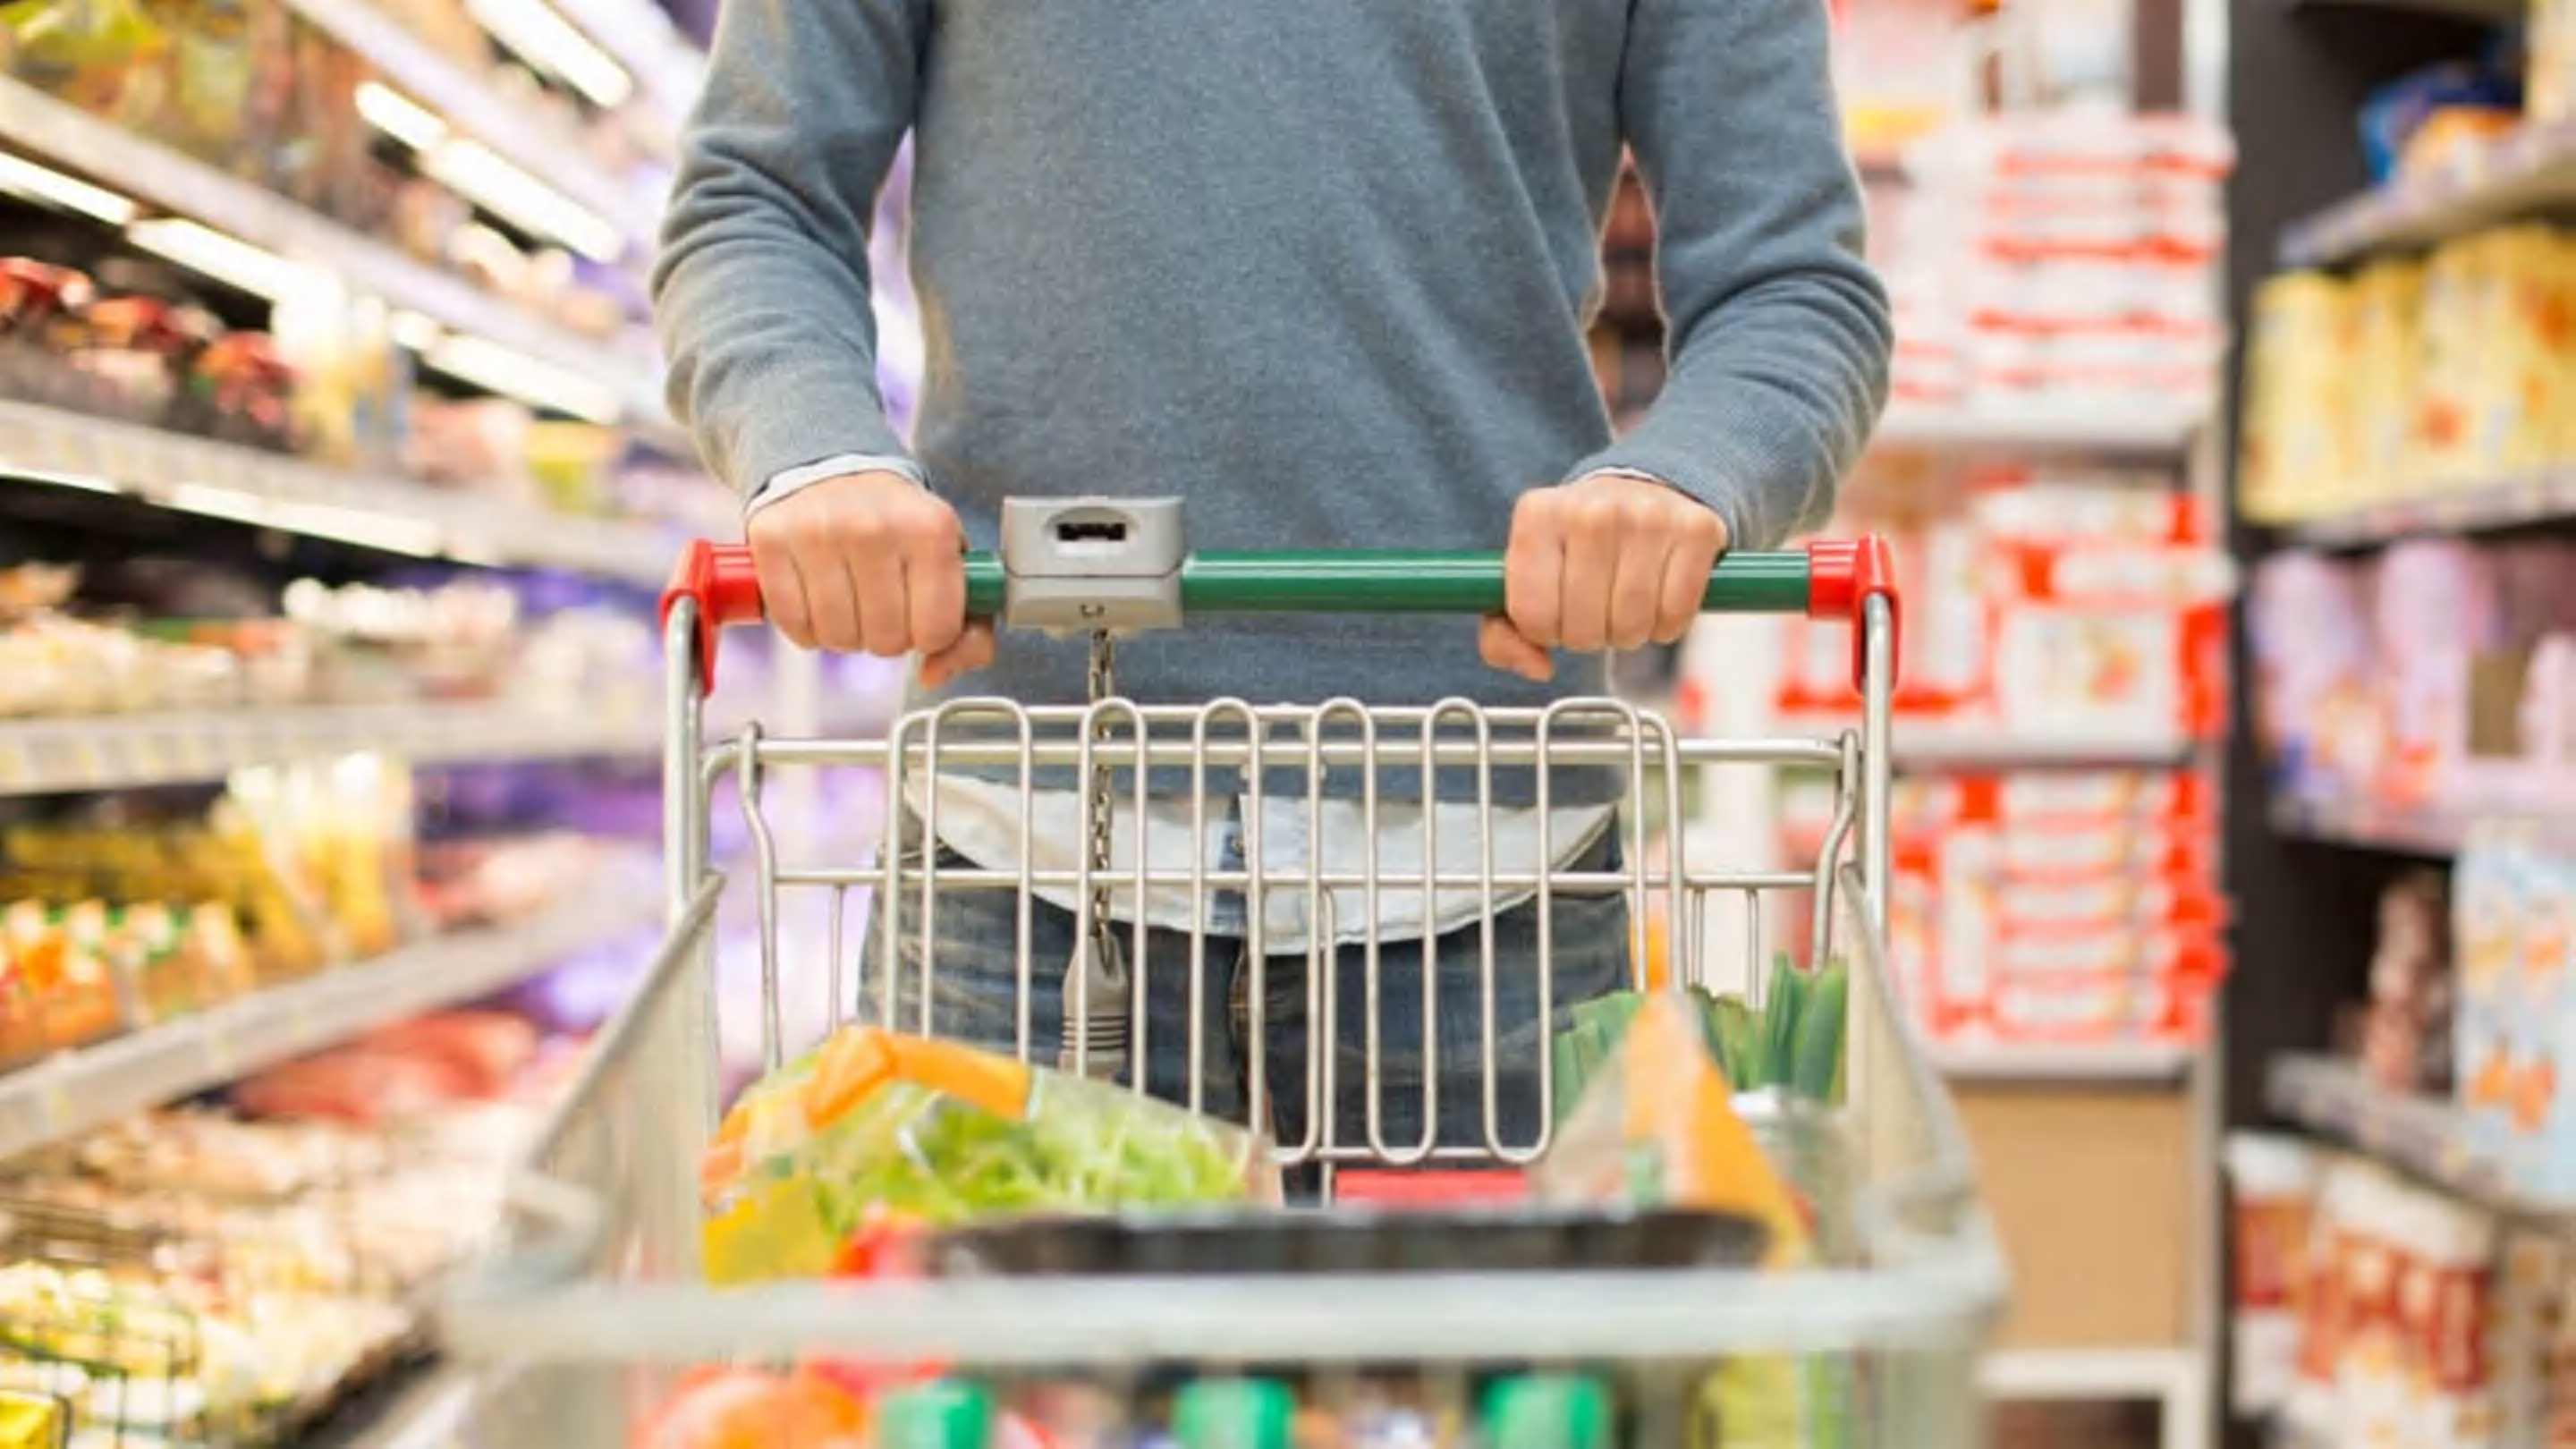 11 Tips for Avoiding Germs at the Grocery Store